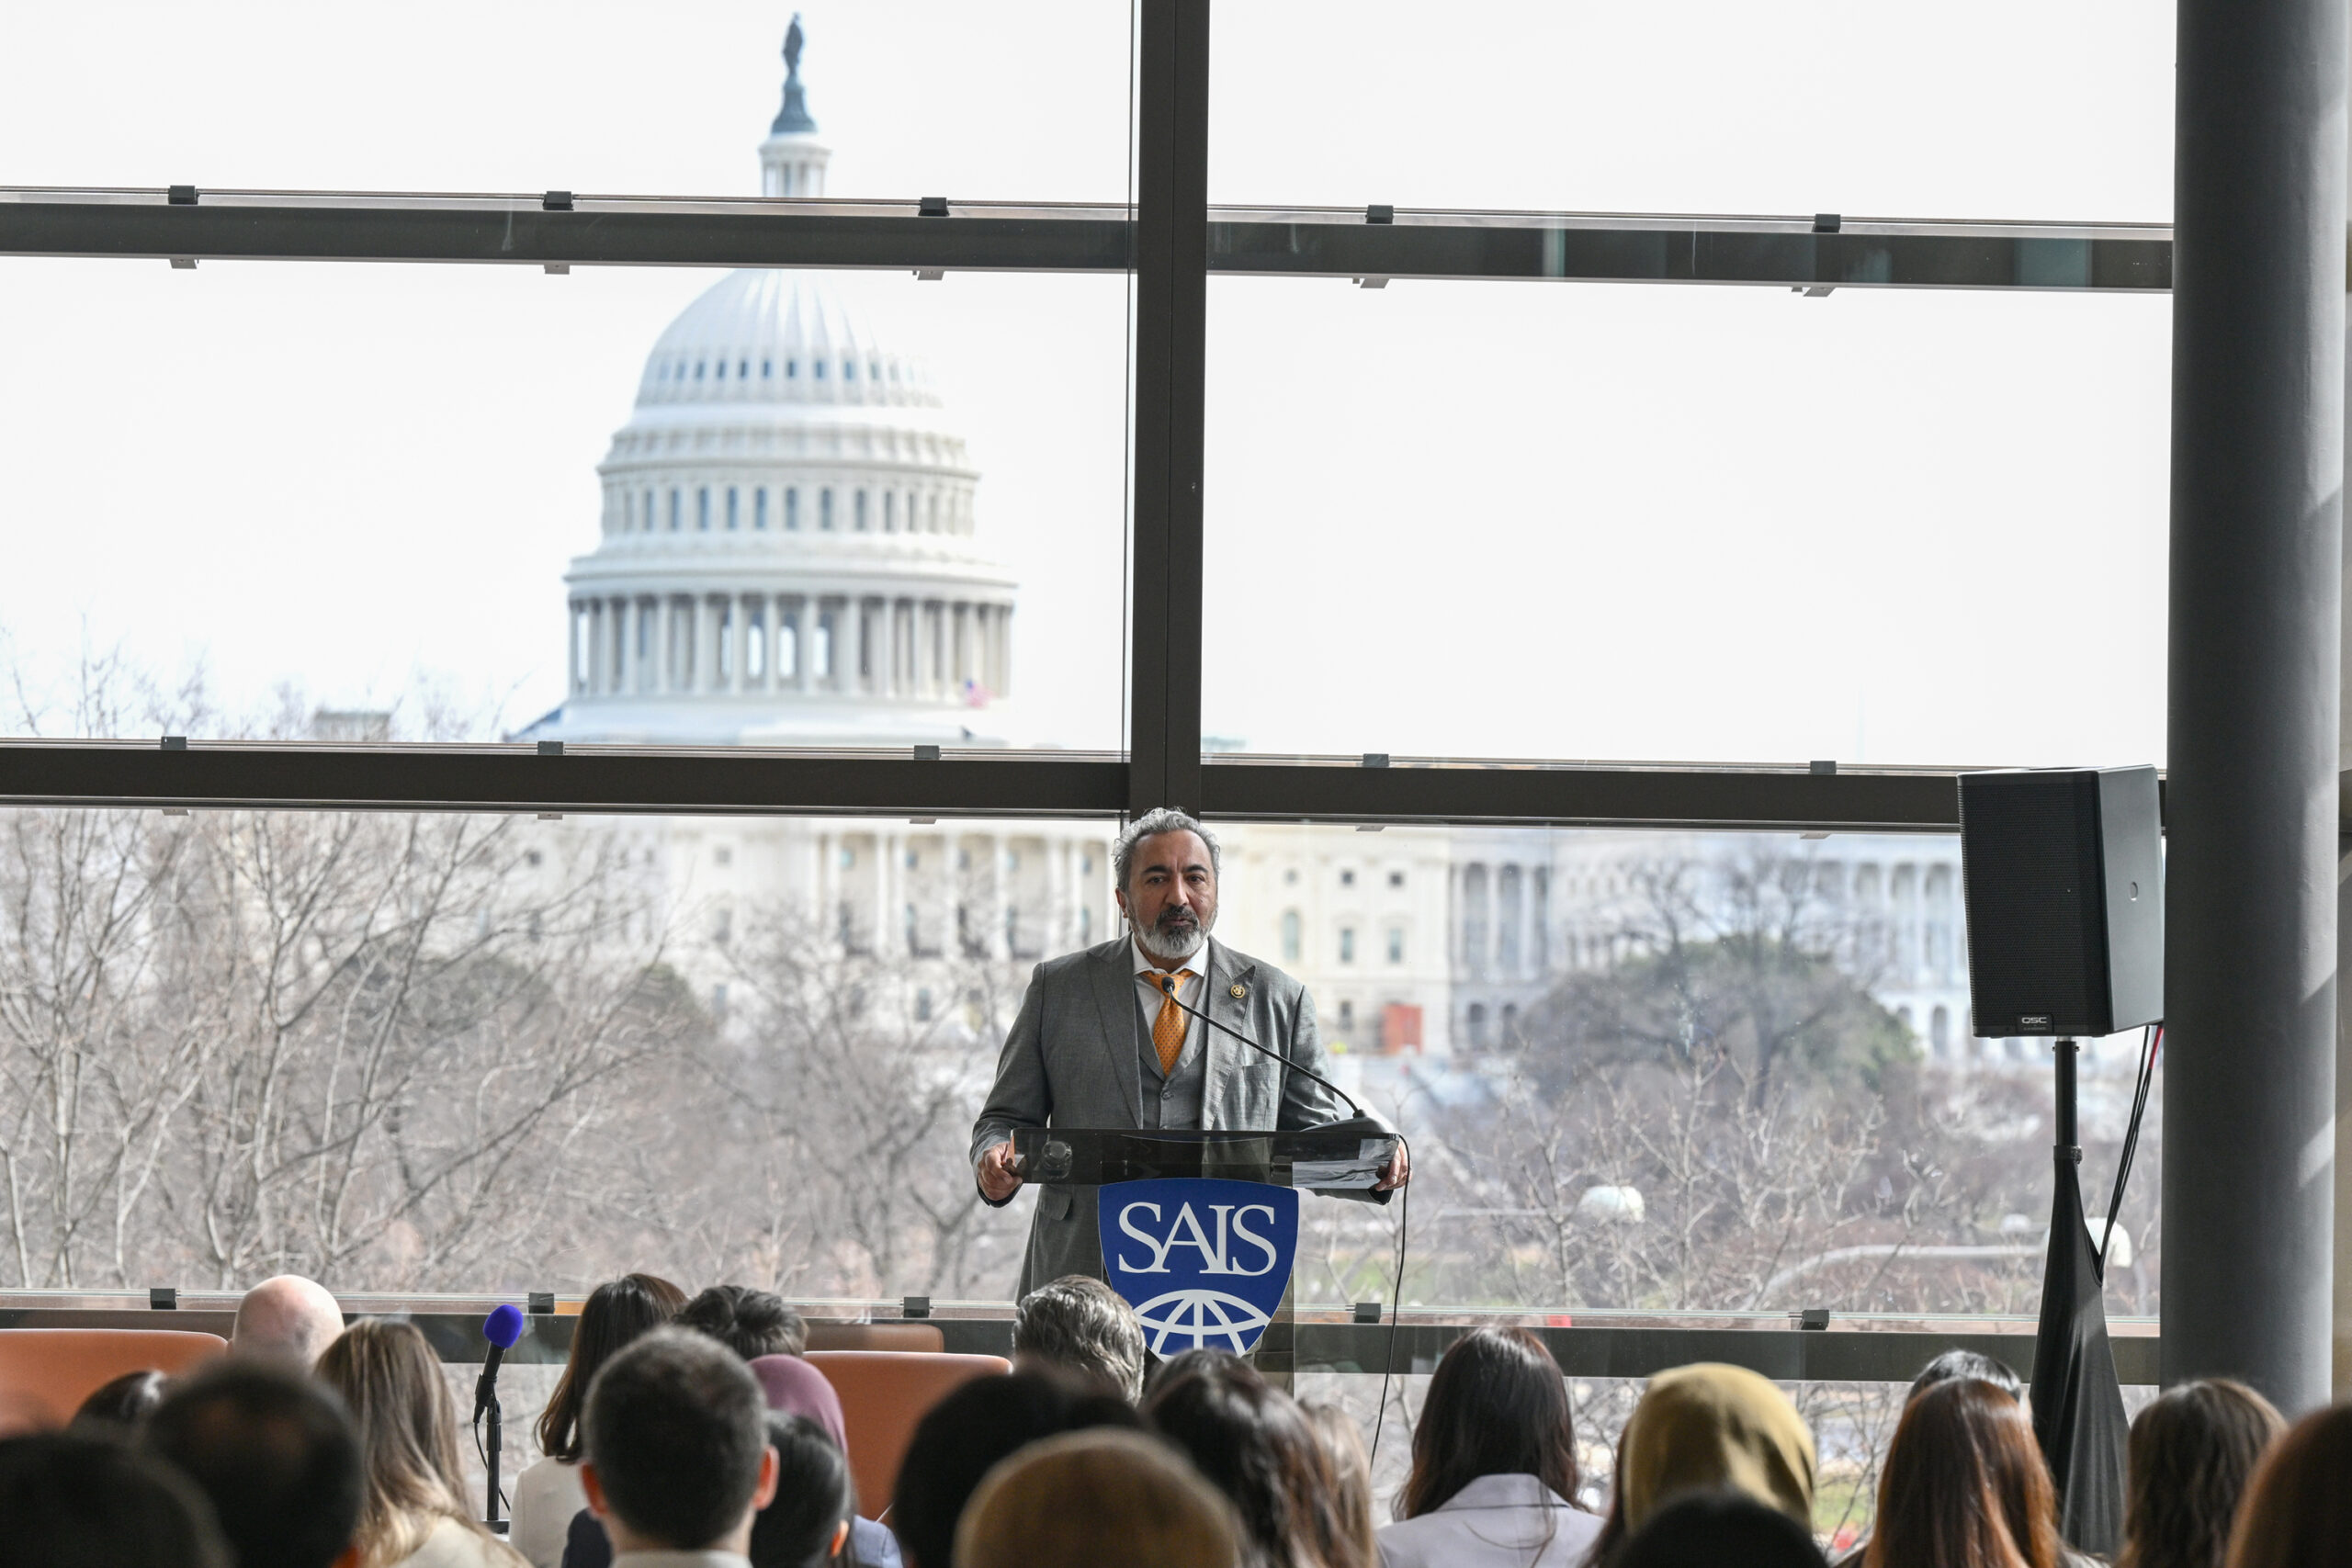 U.S. Rep. Ami Bera speaks to a crowd from a podium bearing a blue SAIS logo; the U.S. Capitol dome is visible through the large glass wall behind him